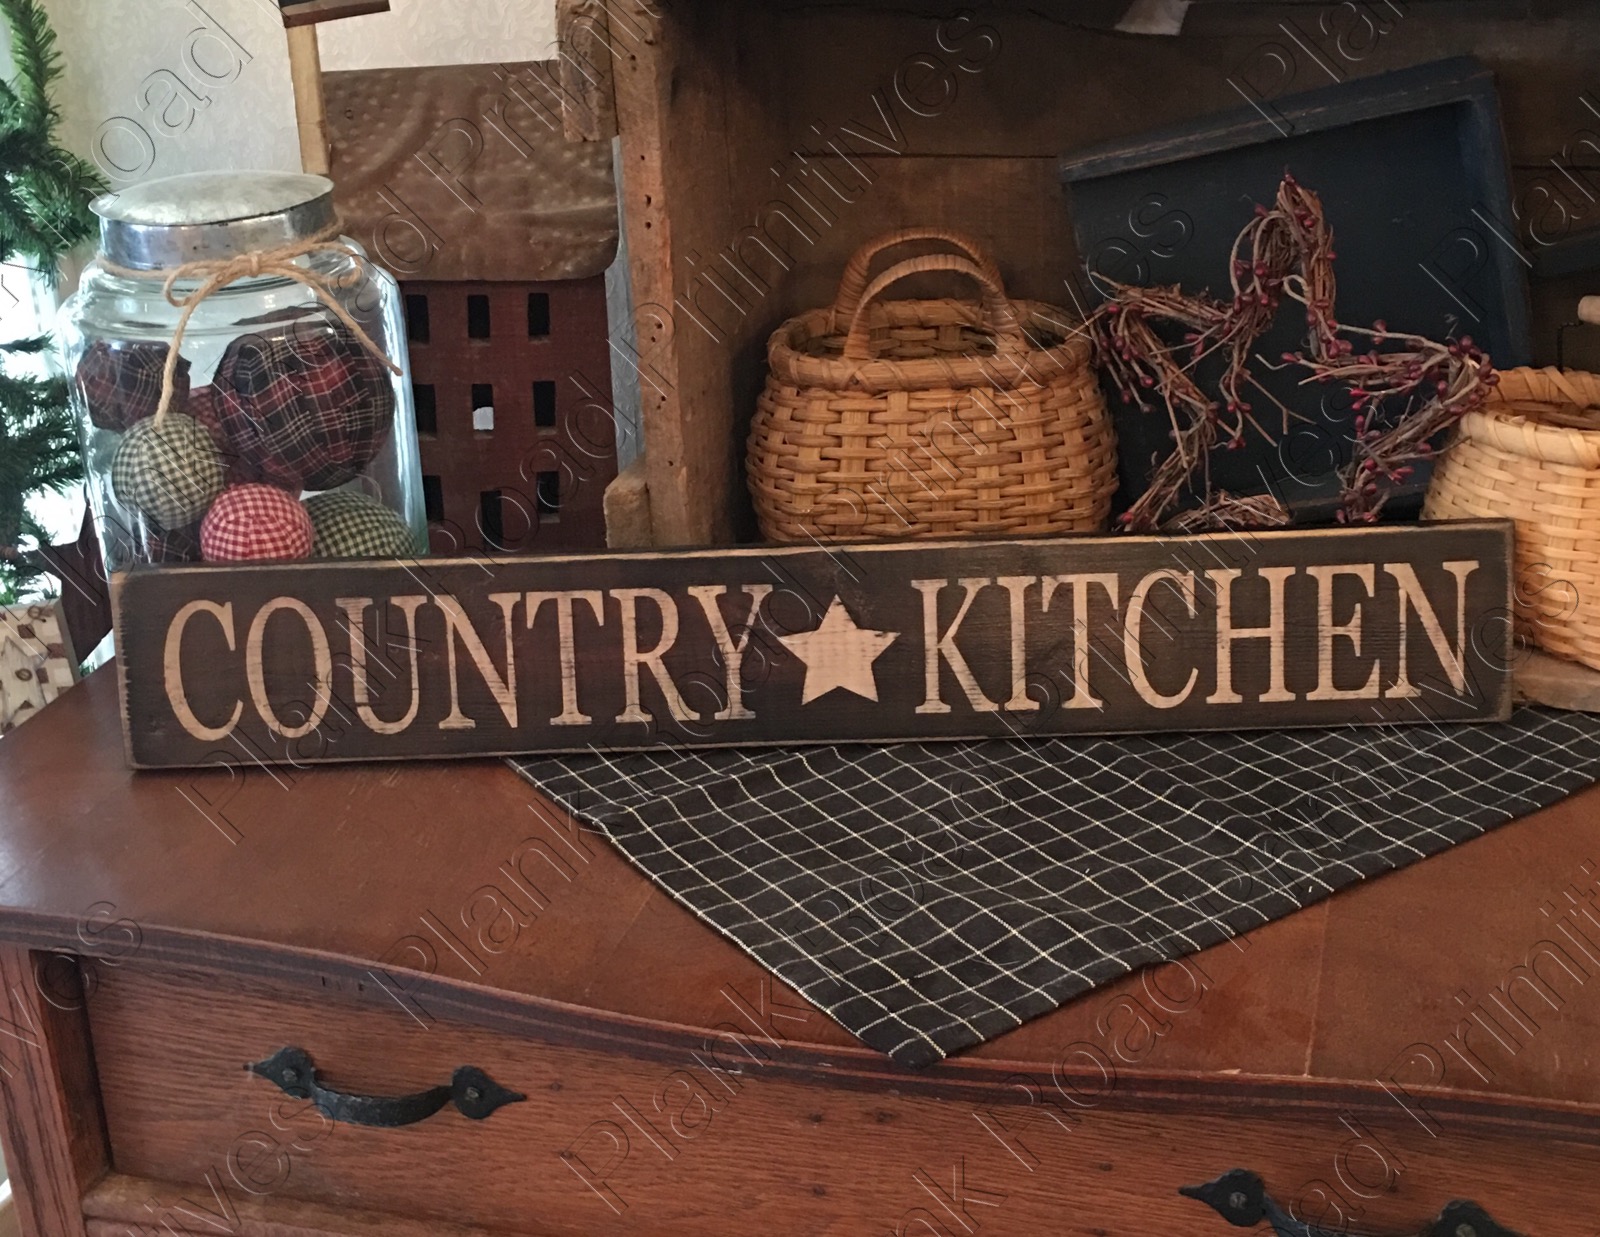 Country Kitchen - 24"x3.5"